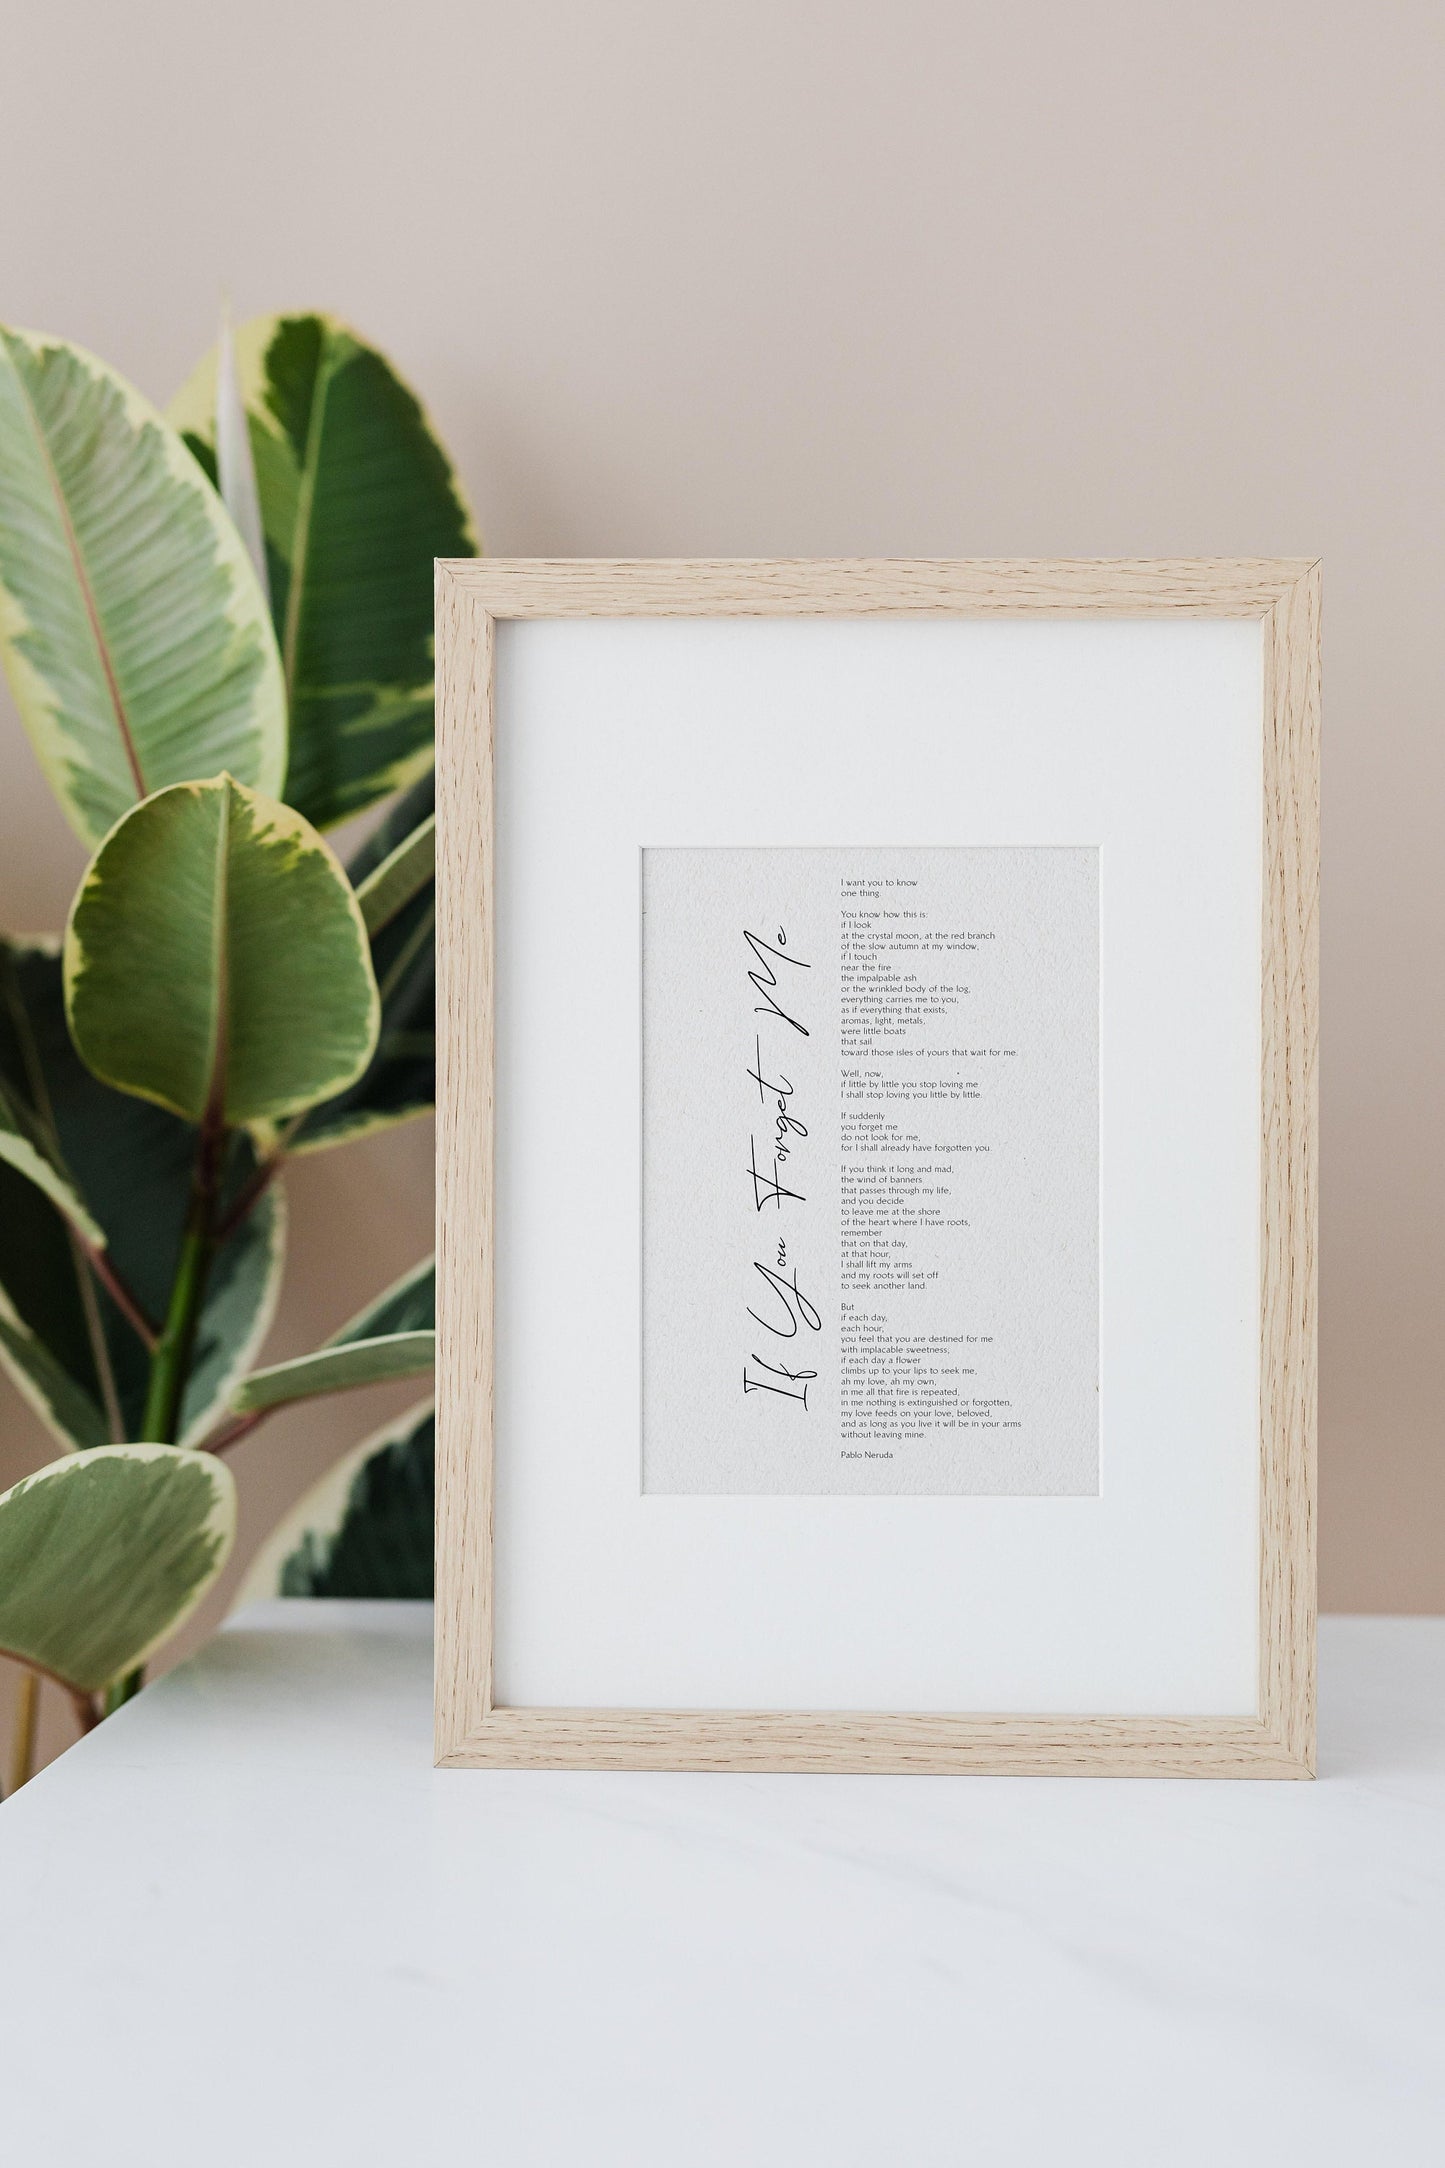 If you forget me Print by Pablo Neruda Print Framed - If you forget me - Funeral reading - Bereavement gift - Pablo Neruda Poem - Memorial